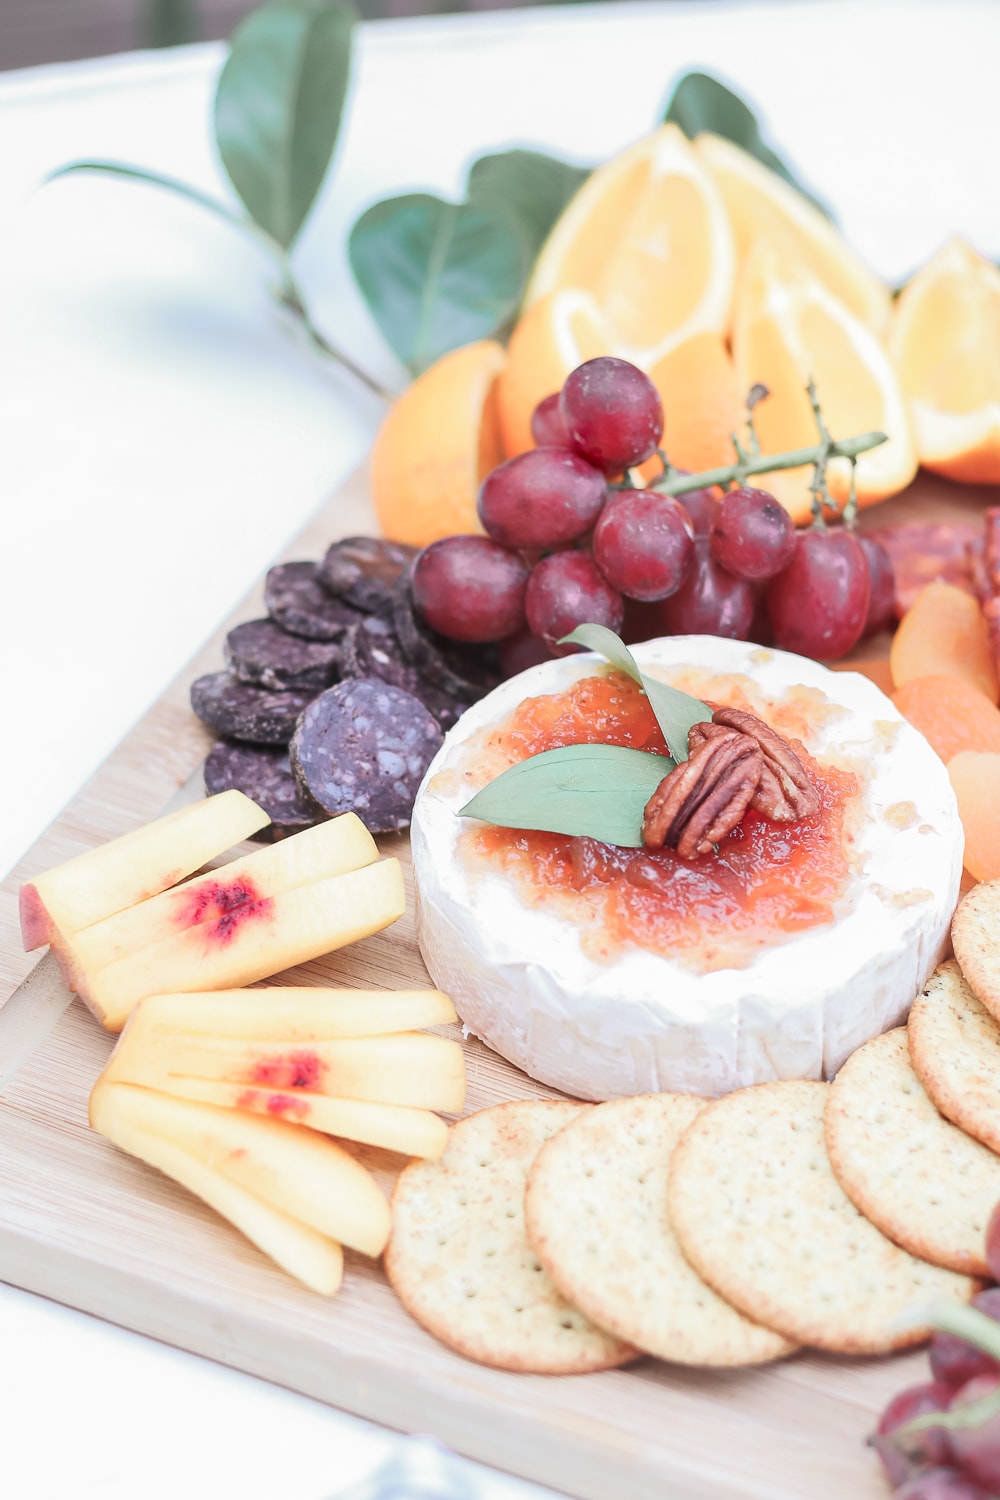 Southern cheese board ideas by blogger Stephanie Ziajka on Diary of a Debutante